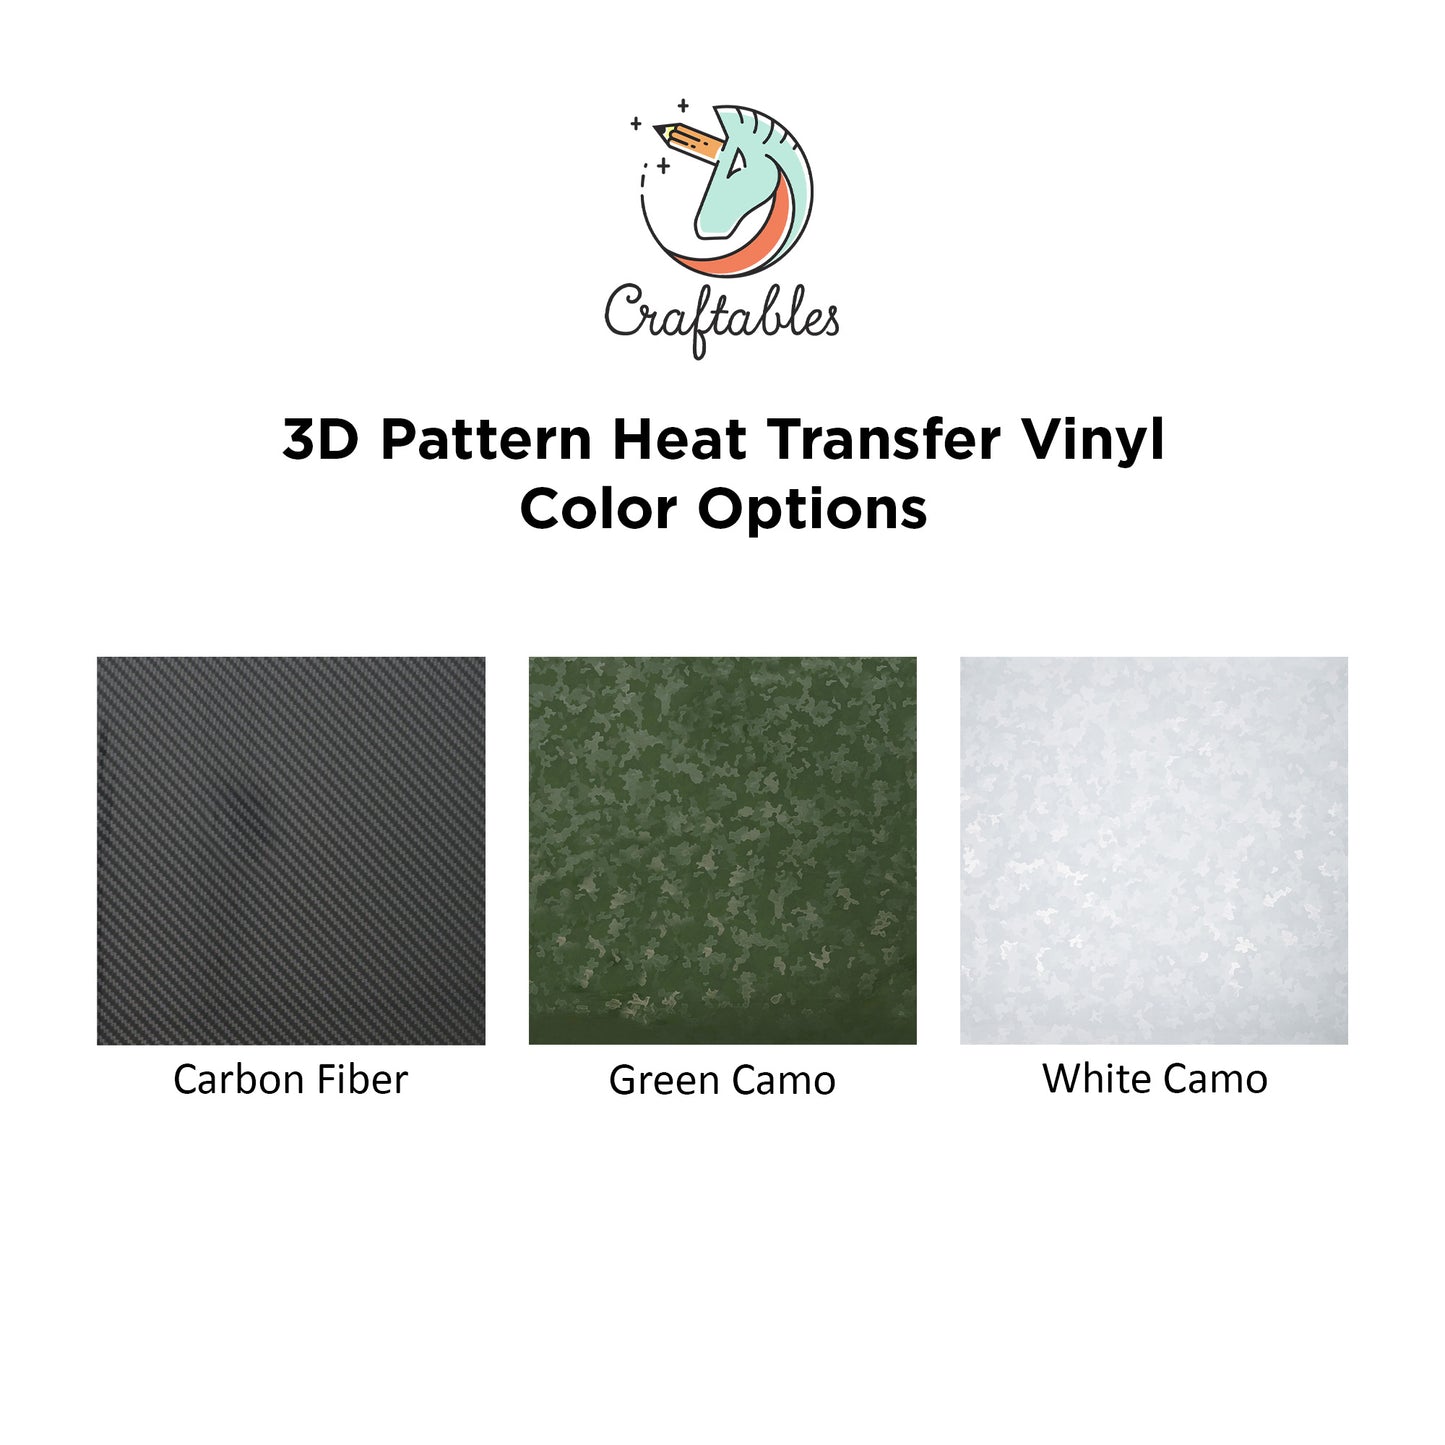 White Camo 3D Pattern Heat Transfer Vinyl Sheets By Craftables